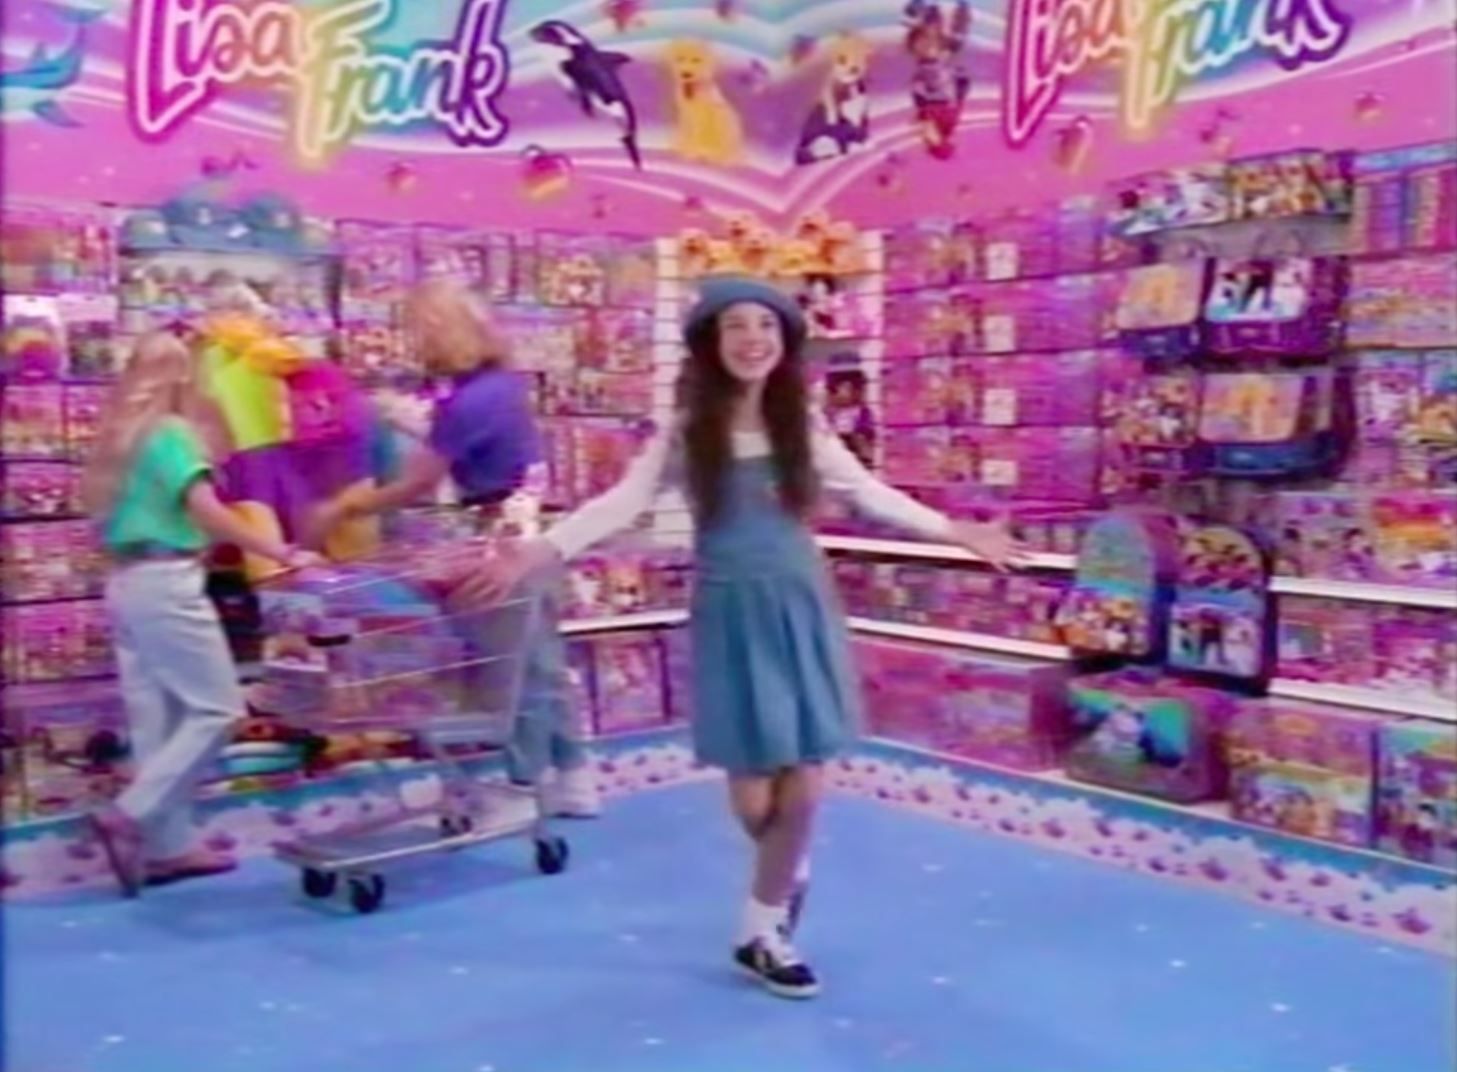 An Old Lisa Frank Factory Is Up For Sale, So Now We Can Finally See Inside